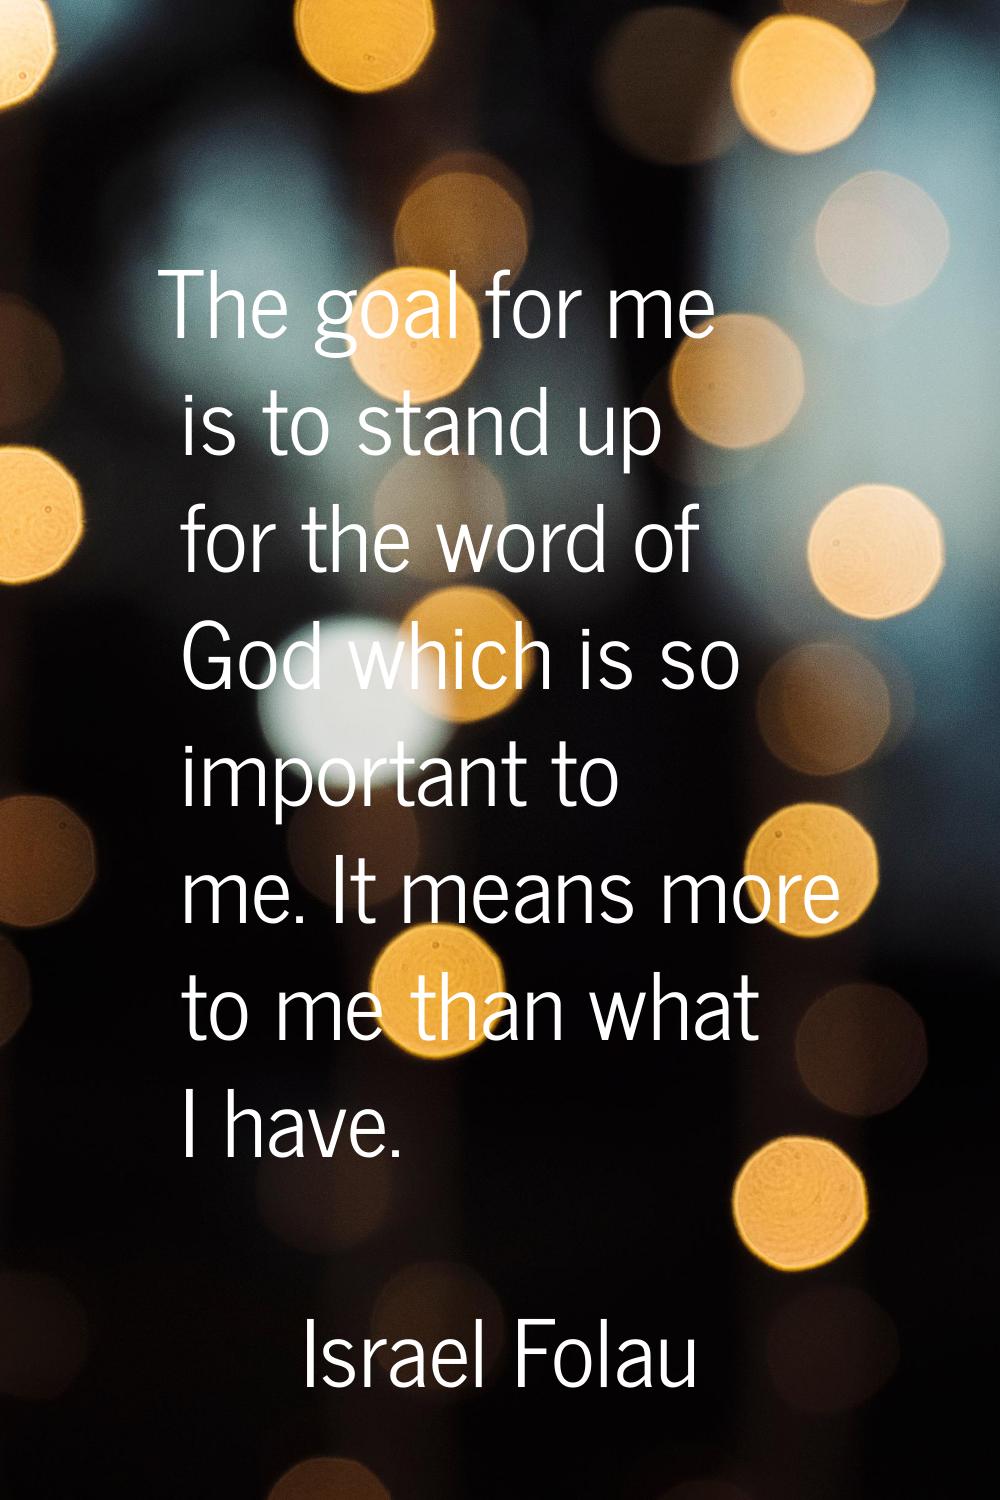 The goal for me is to stand up for the word of God which is so important to me. It means more to me